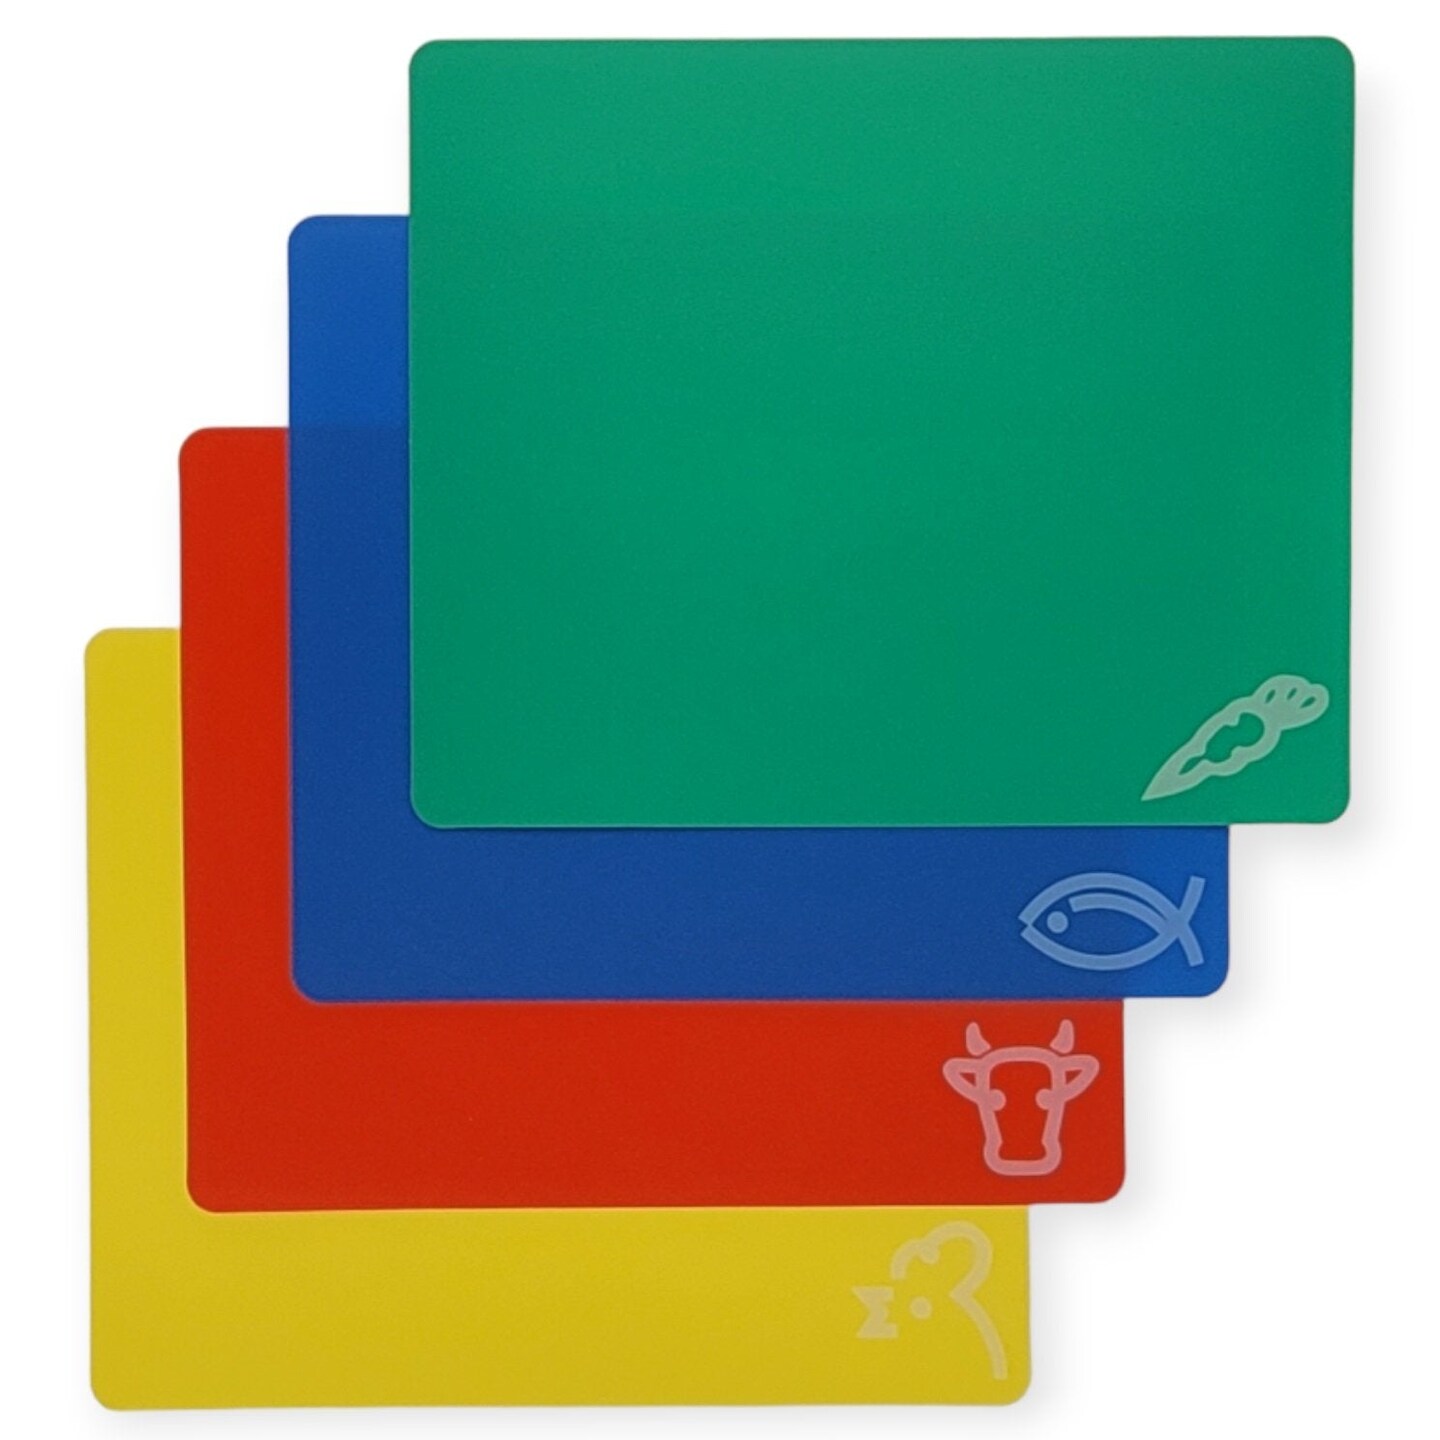 Handy Housewares 4pc Flexible Cutting Mat Set - Veggie, Fish, Beef and Poultry Cutting Mat Set, 11.75 x 9.75 Inches